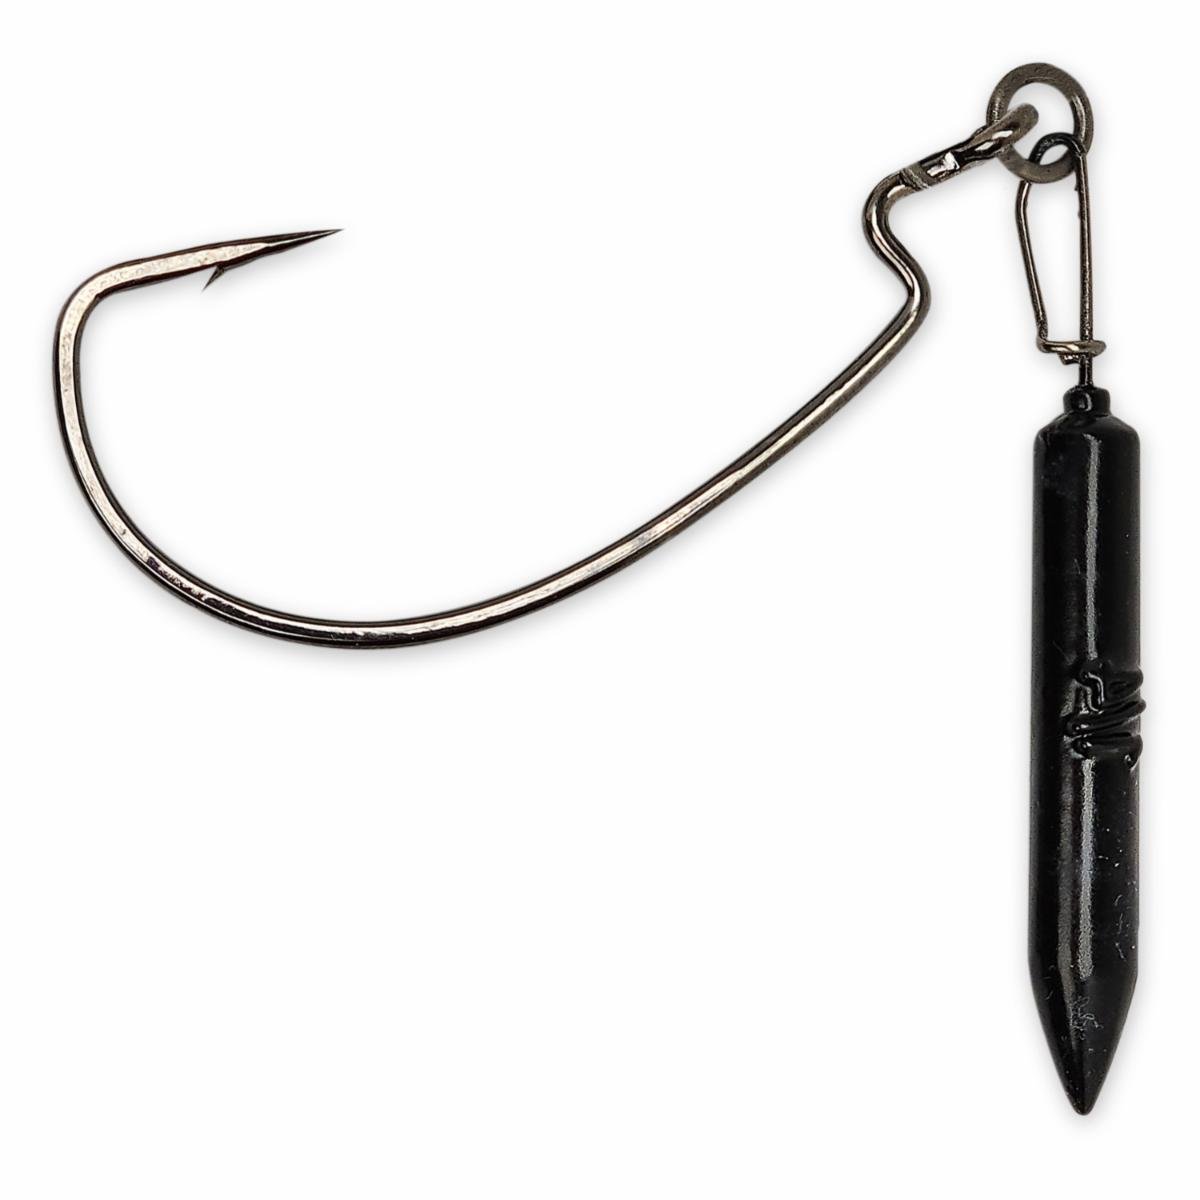 Gamakatsu G Finesse - Drop Shot Hook - Size 1 - qty 6pack - Welcome to  Tight Lipped Tactics